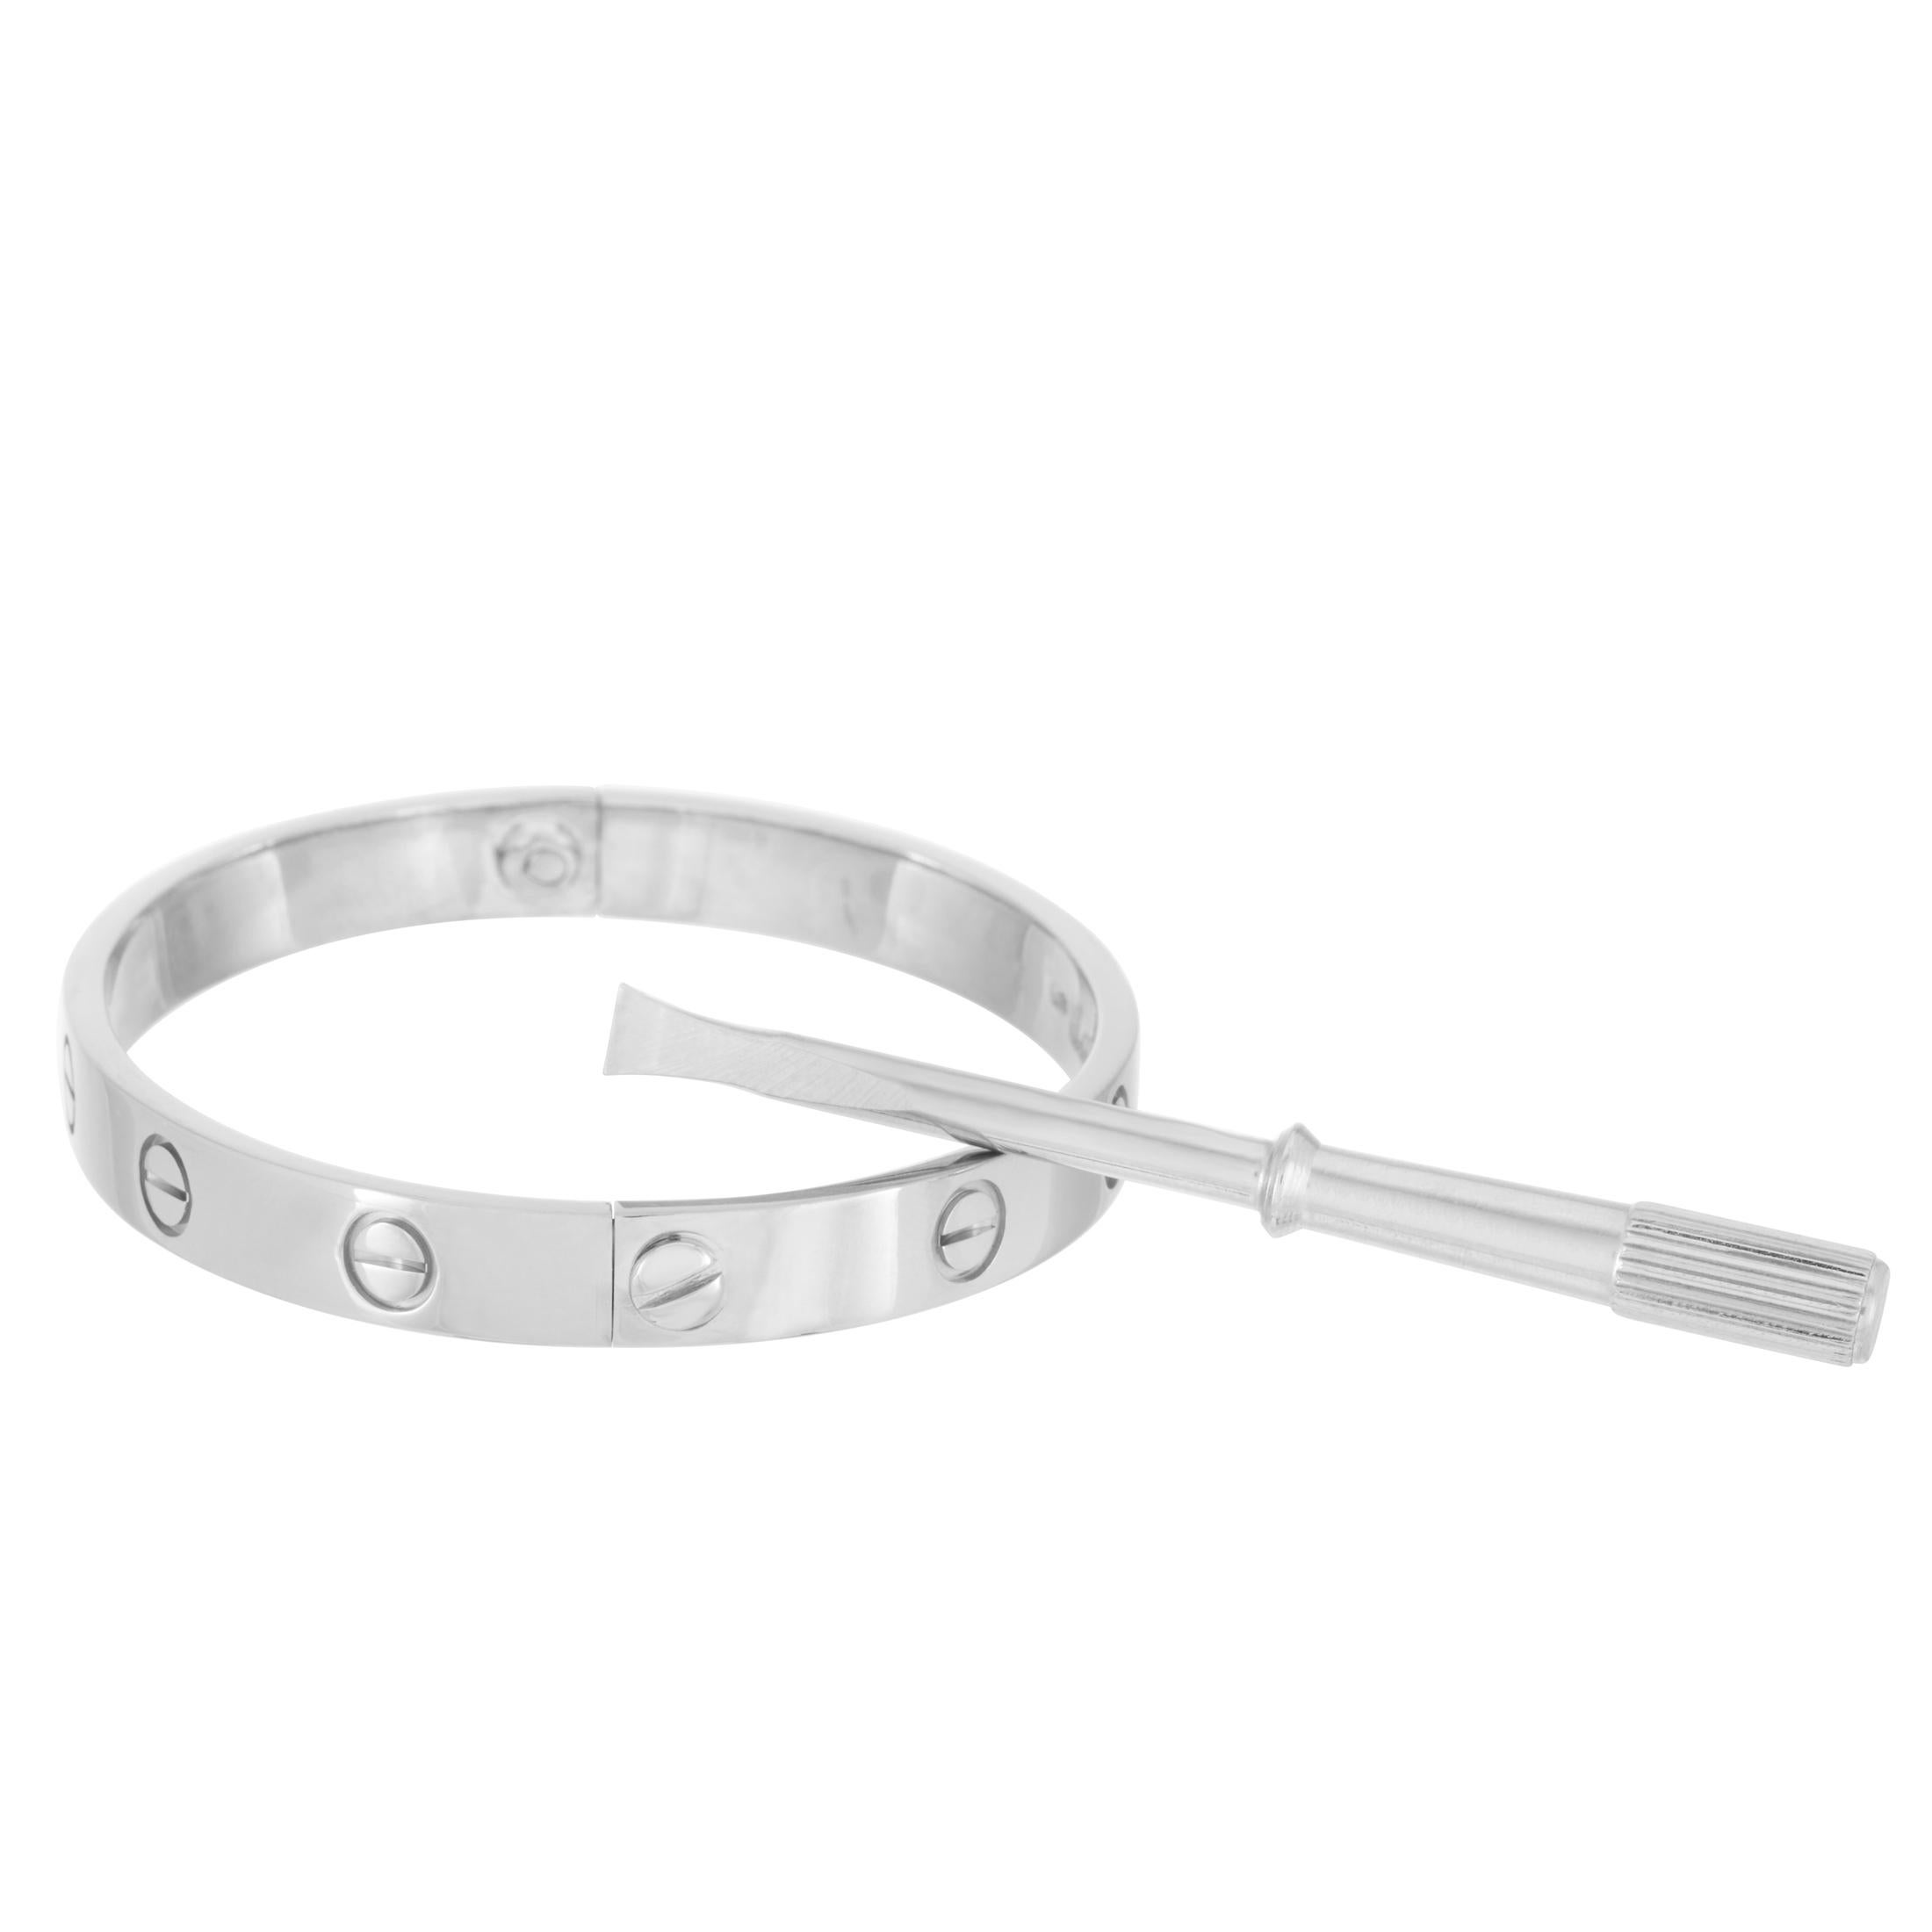 The Cartier “LOVE” bracelet is crafted from 18K white gold and measures 6.3” in length. The bracelet weighs 30.1 grams and is delivered with a screwdriver.